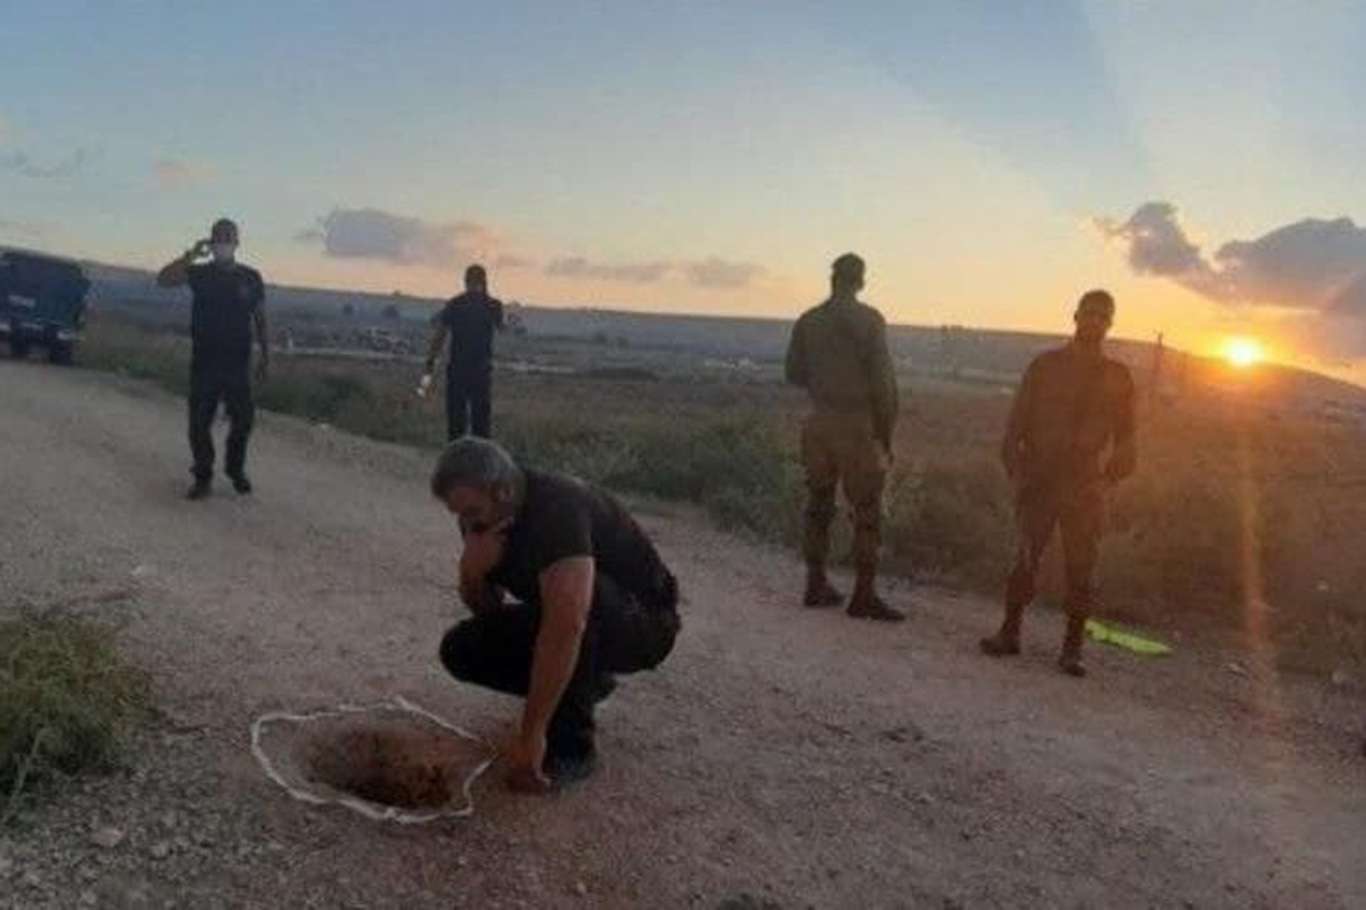 6 Palestinian prisoners break out of Gilboa prison through tunnel they dig